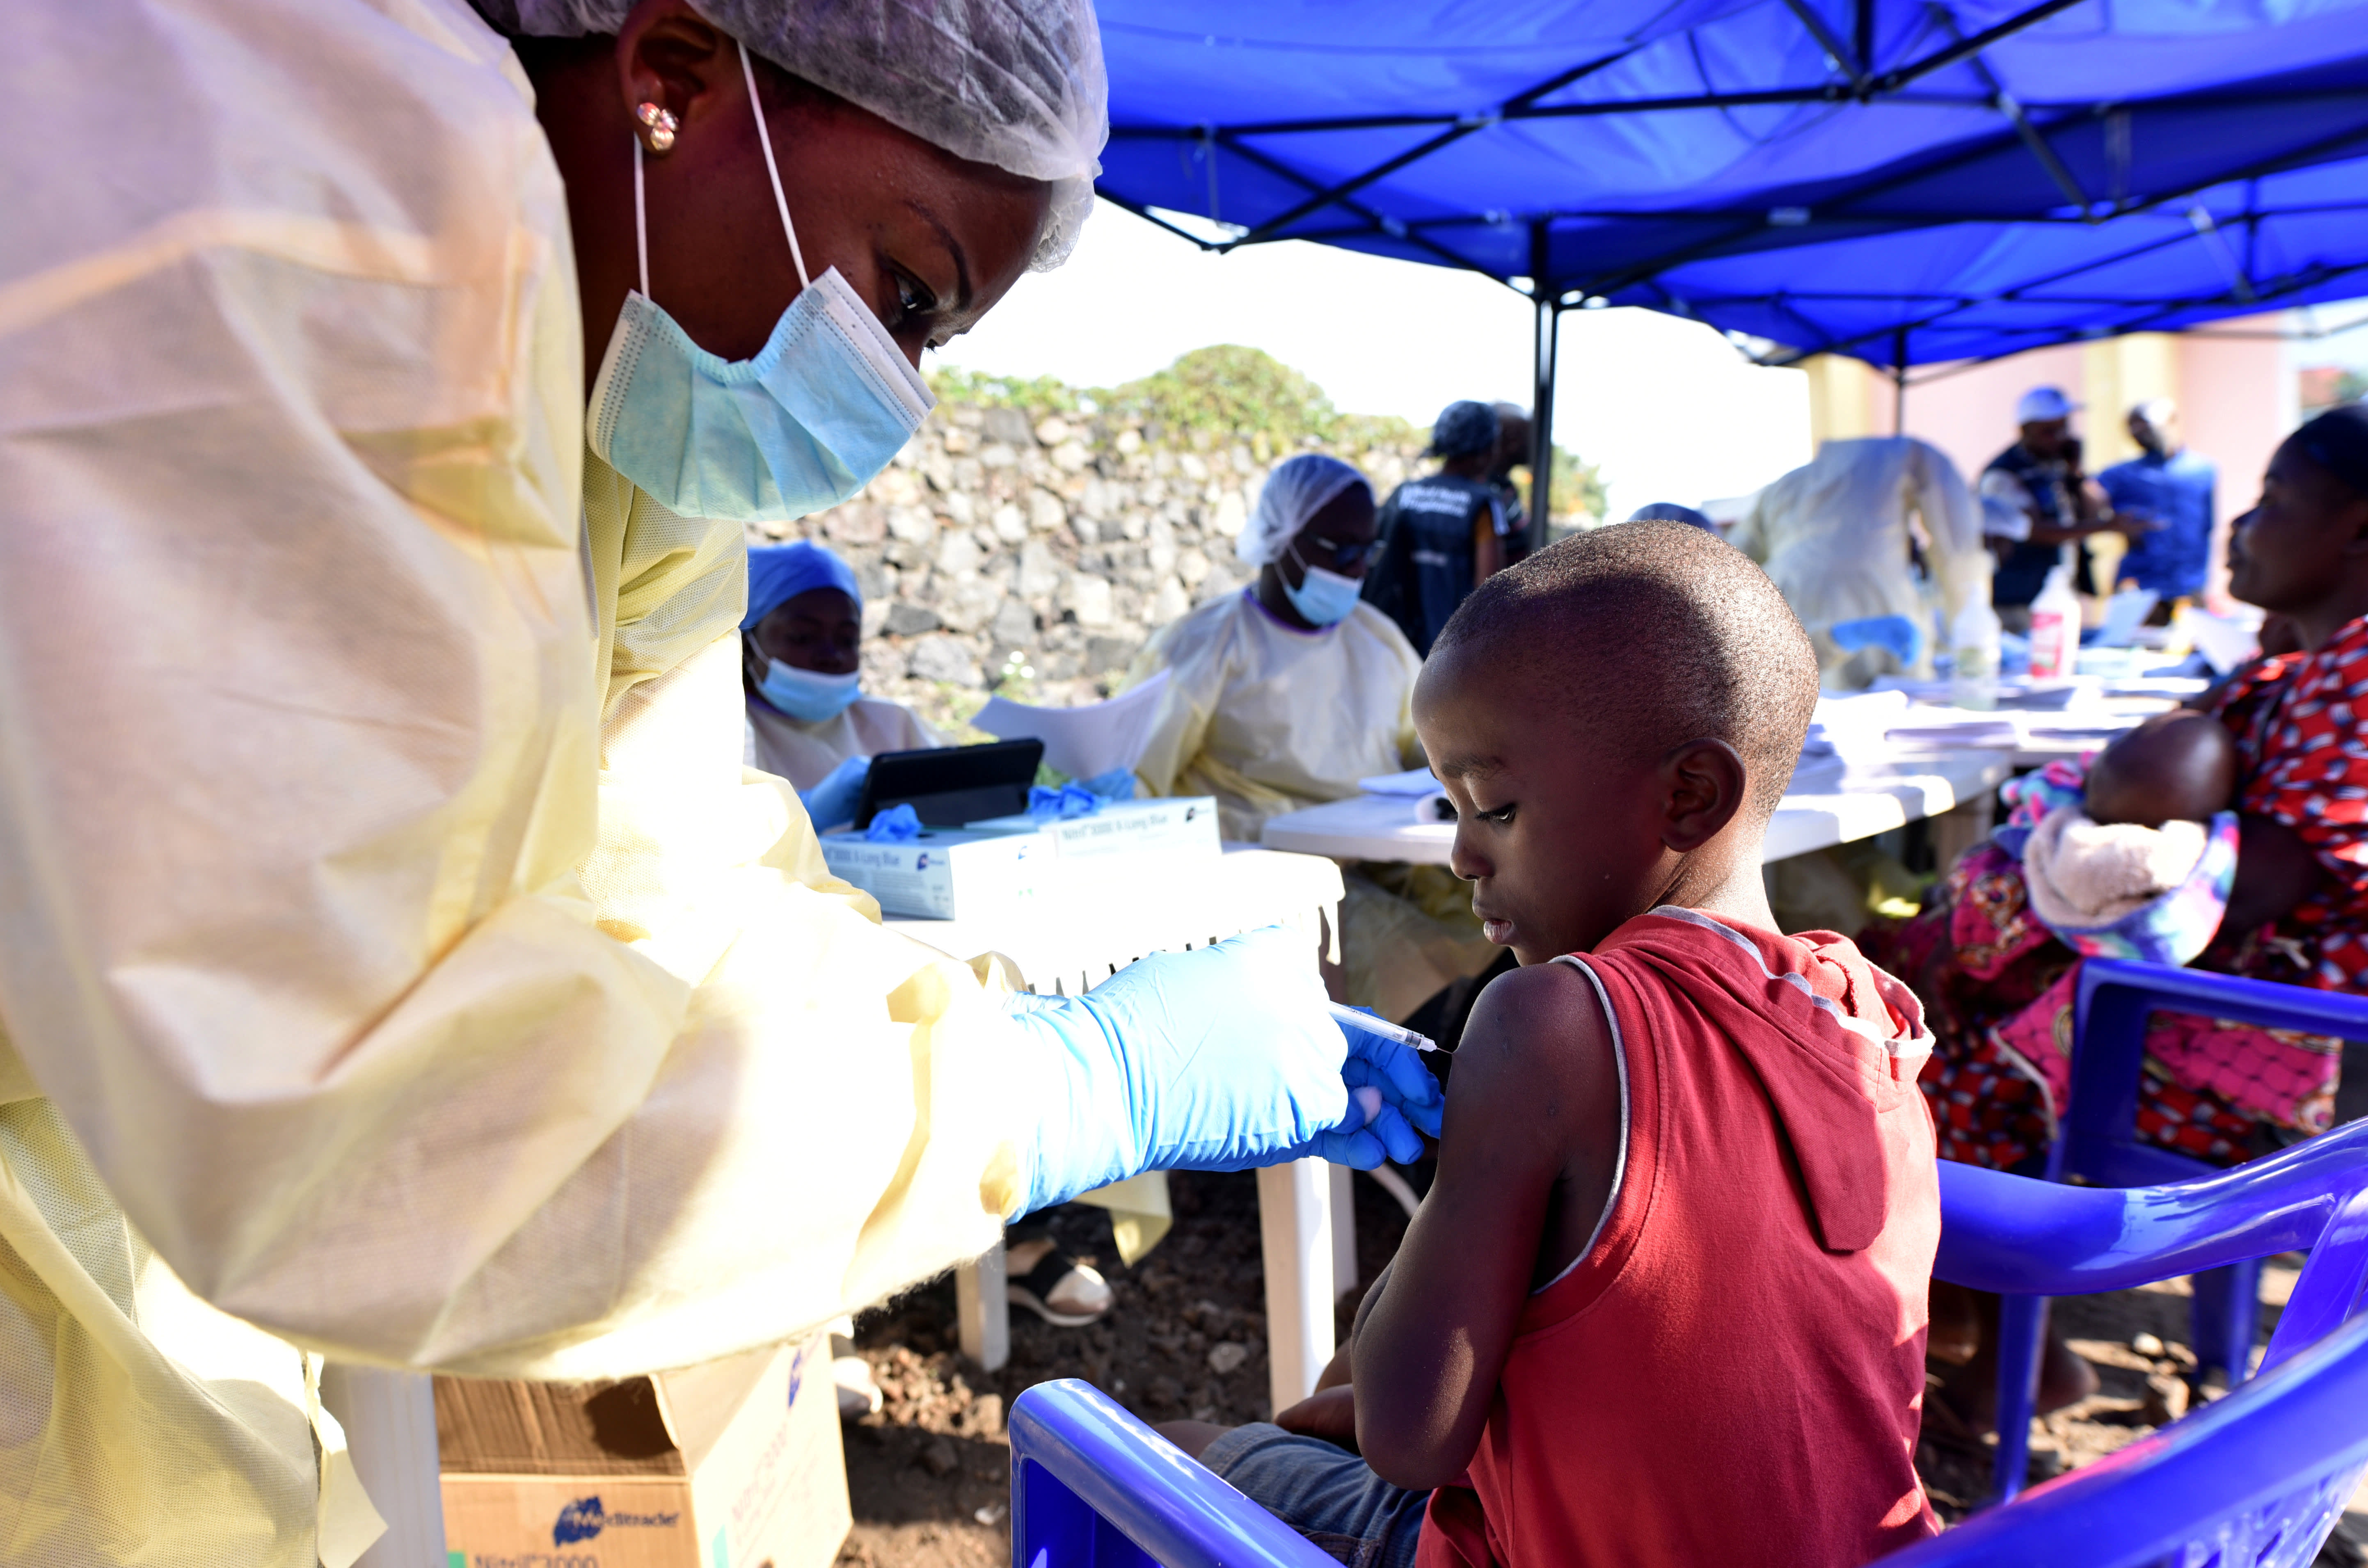 White House says Ebola outbreaks in Africa must be addressed quickly to avoid ‘catastrophic consequences’